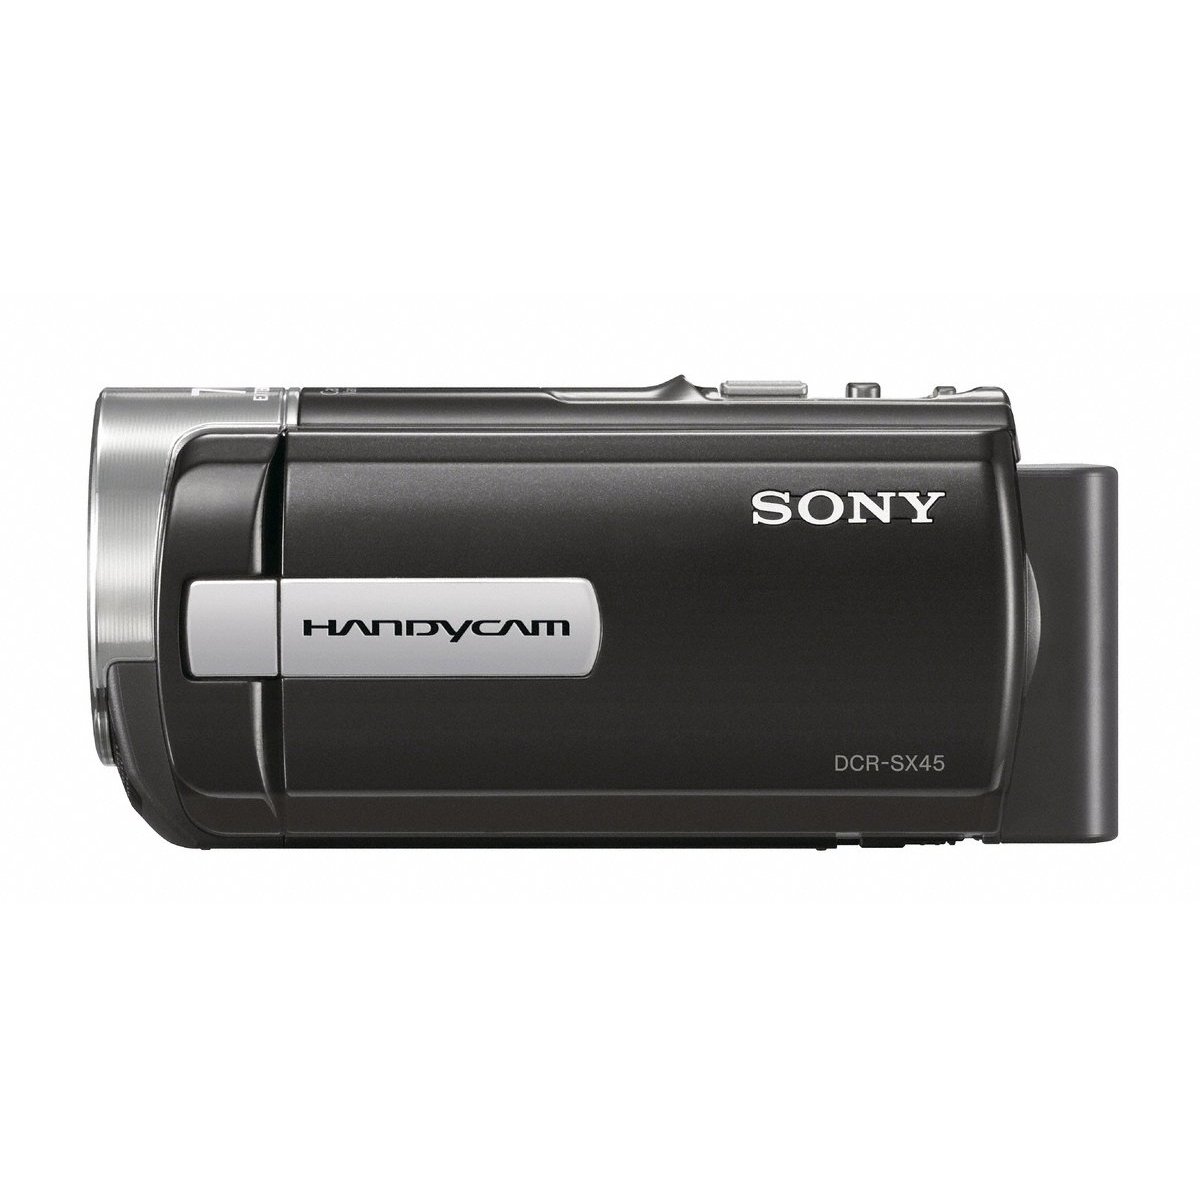 http://thetechjournal.com/wp-content/uploads/images/1108/1314692838-sony-dcrsx45-handycam-camcorder--3.jpg